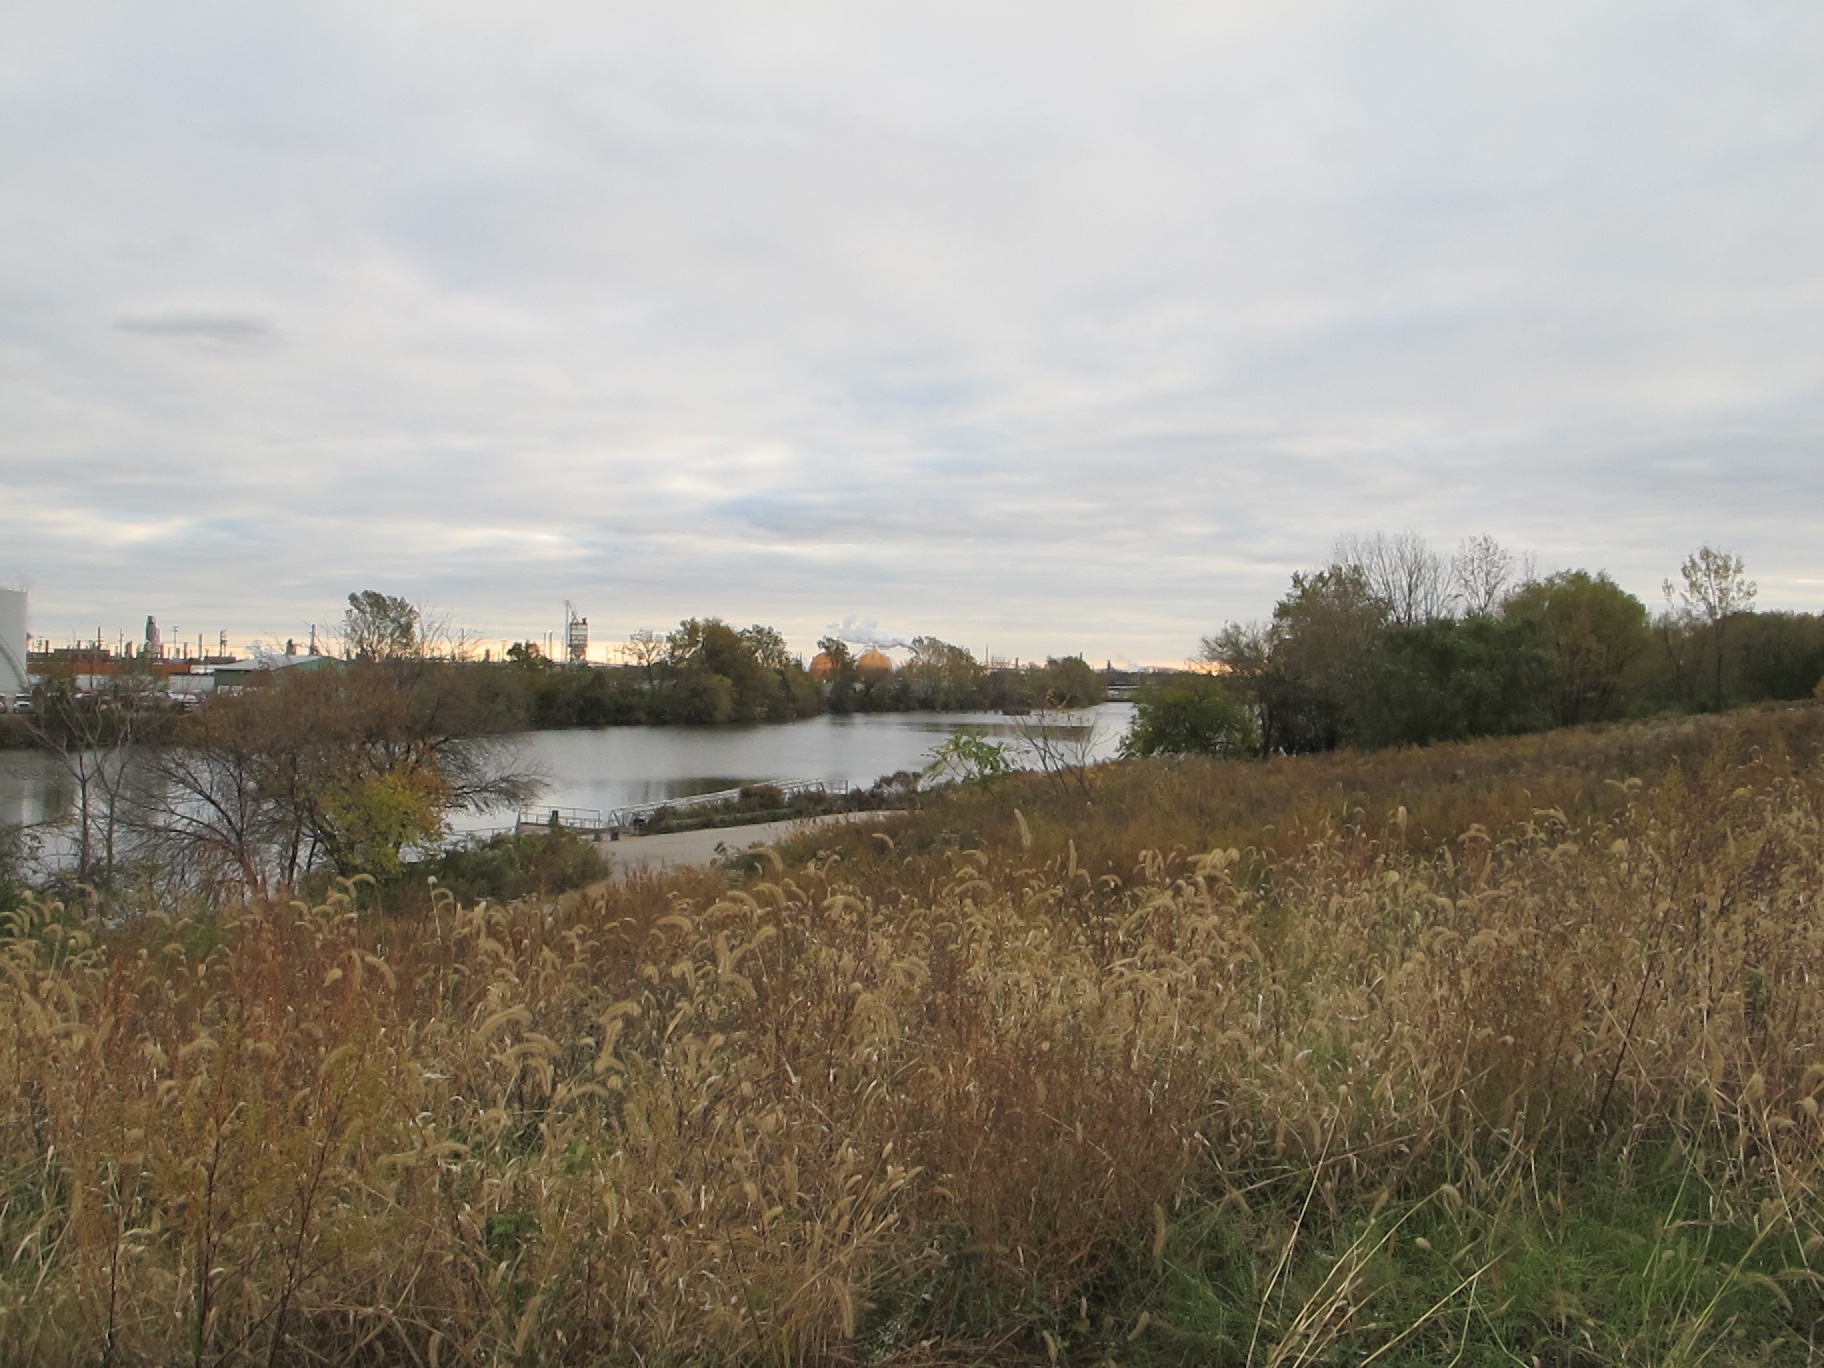 Looking south from the new trail at Bartram's Garden to the Schuylkill River (and Sunoco beyond).